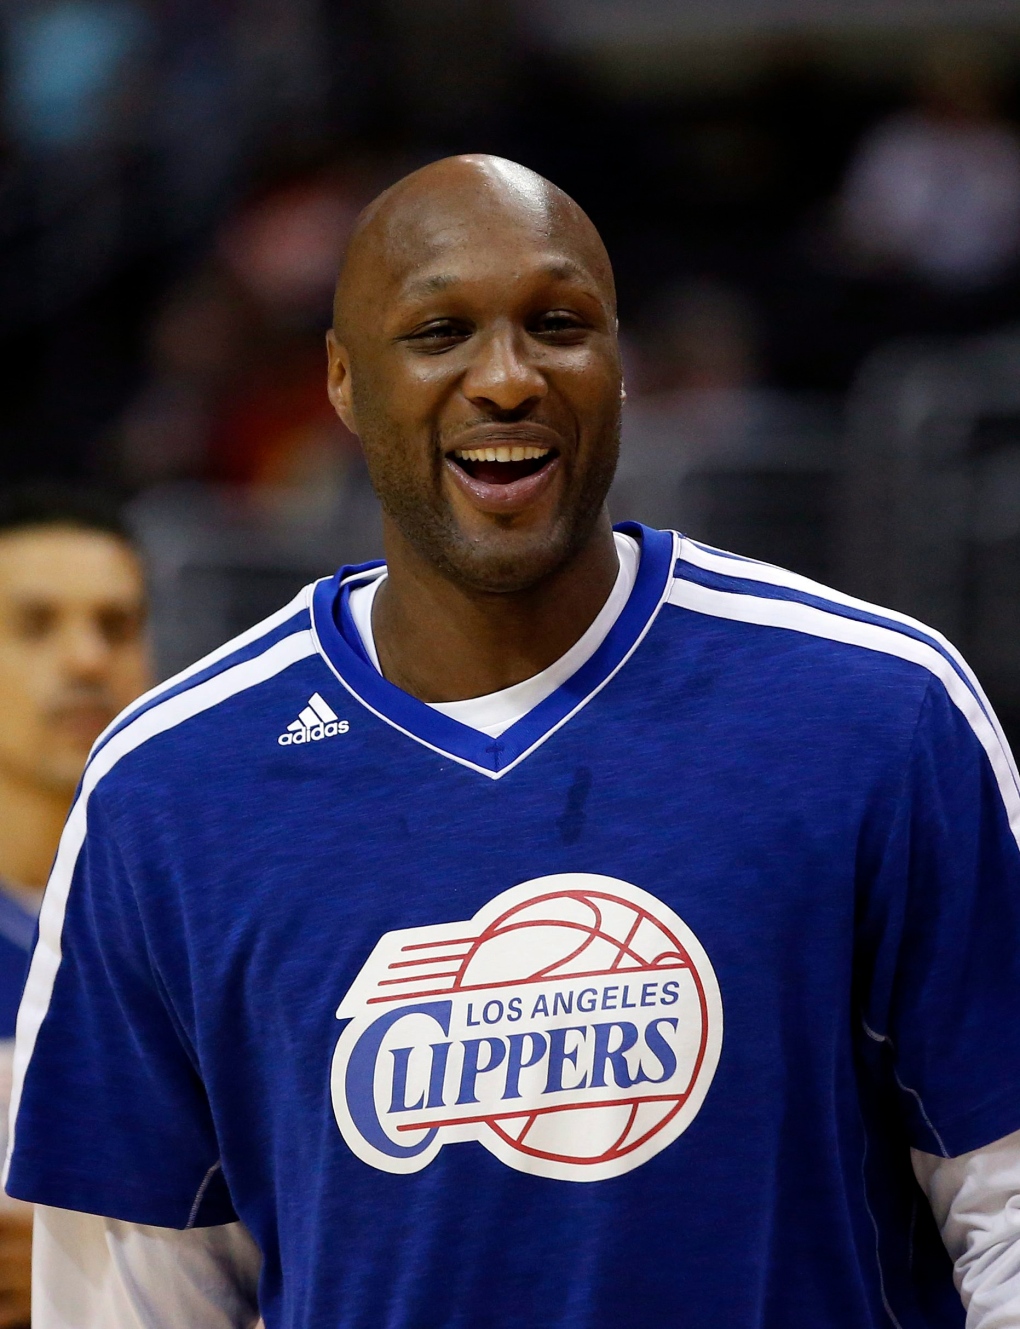 Los Angeles Clippers' Lamar Odom